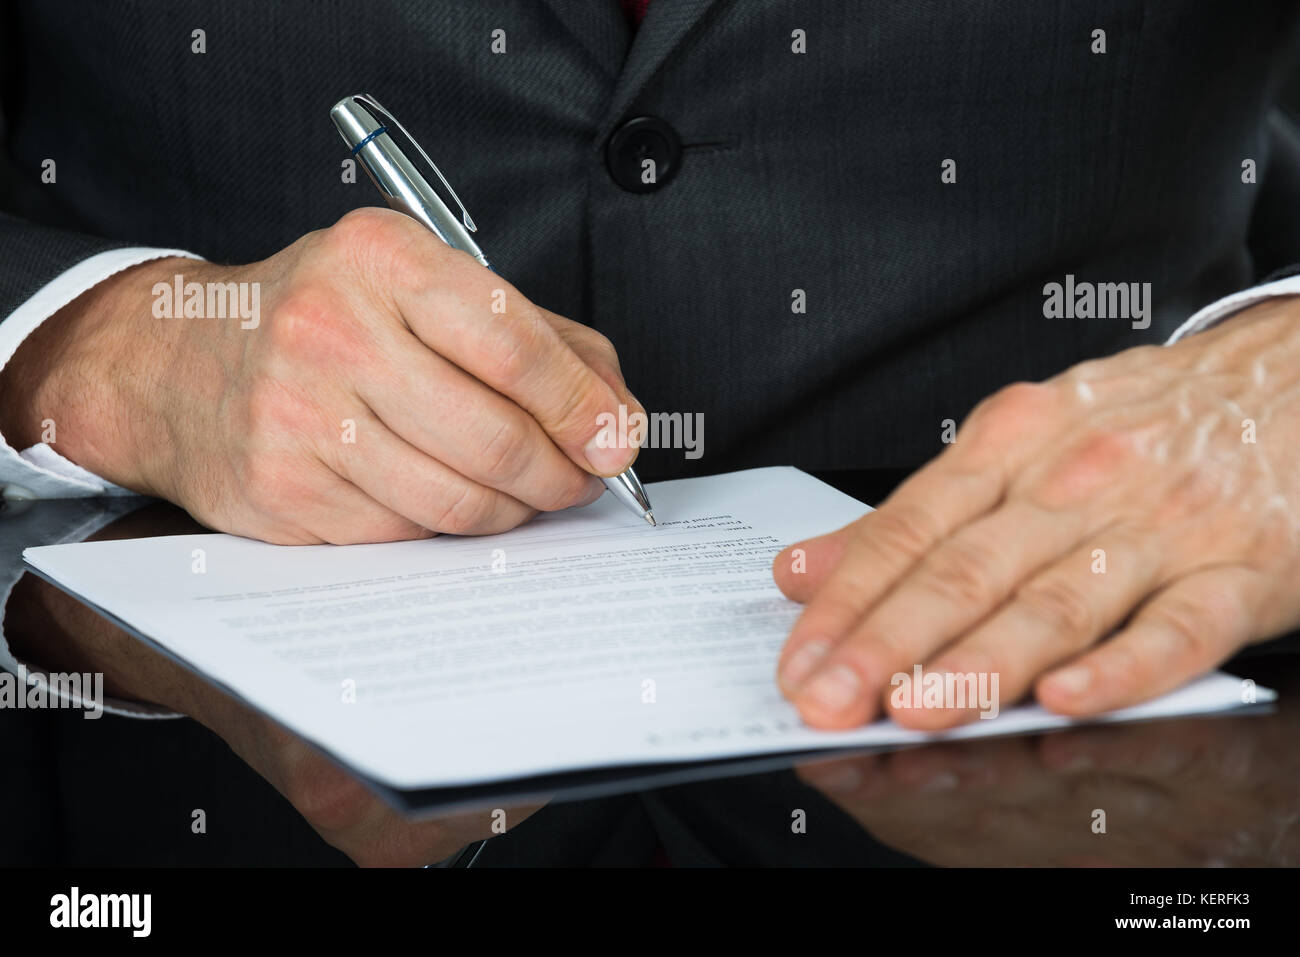 Close-up Of Businessman Hand Holding Pen Over Contract Form On Desk Stock Photo